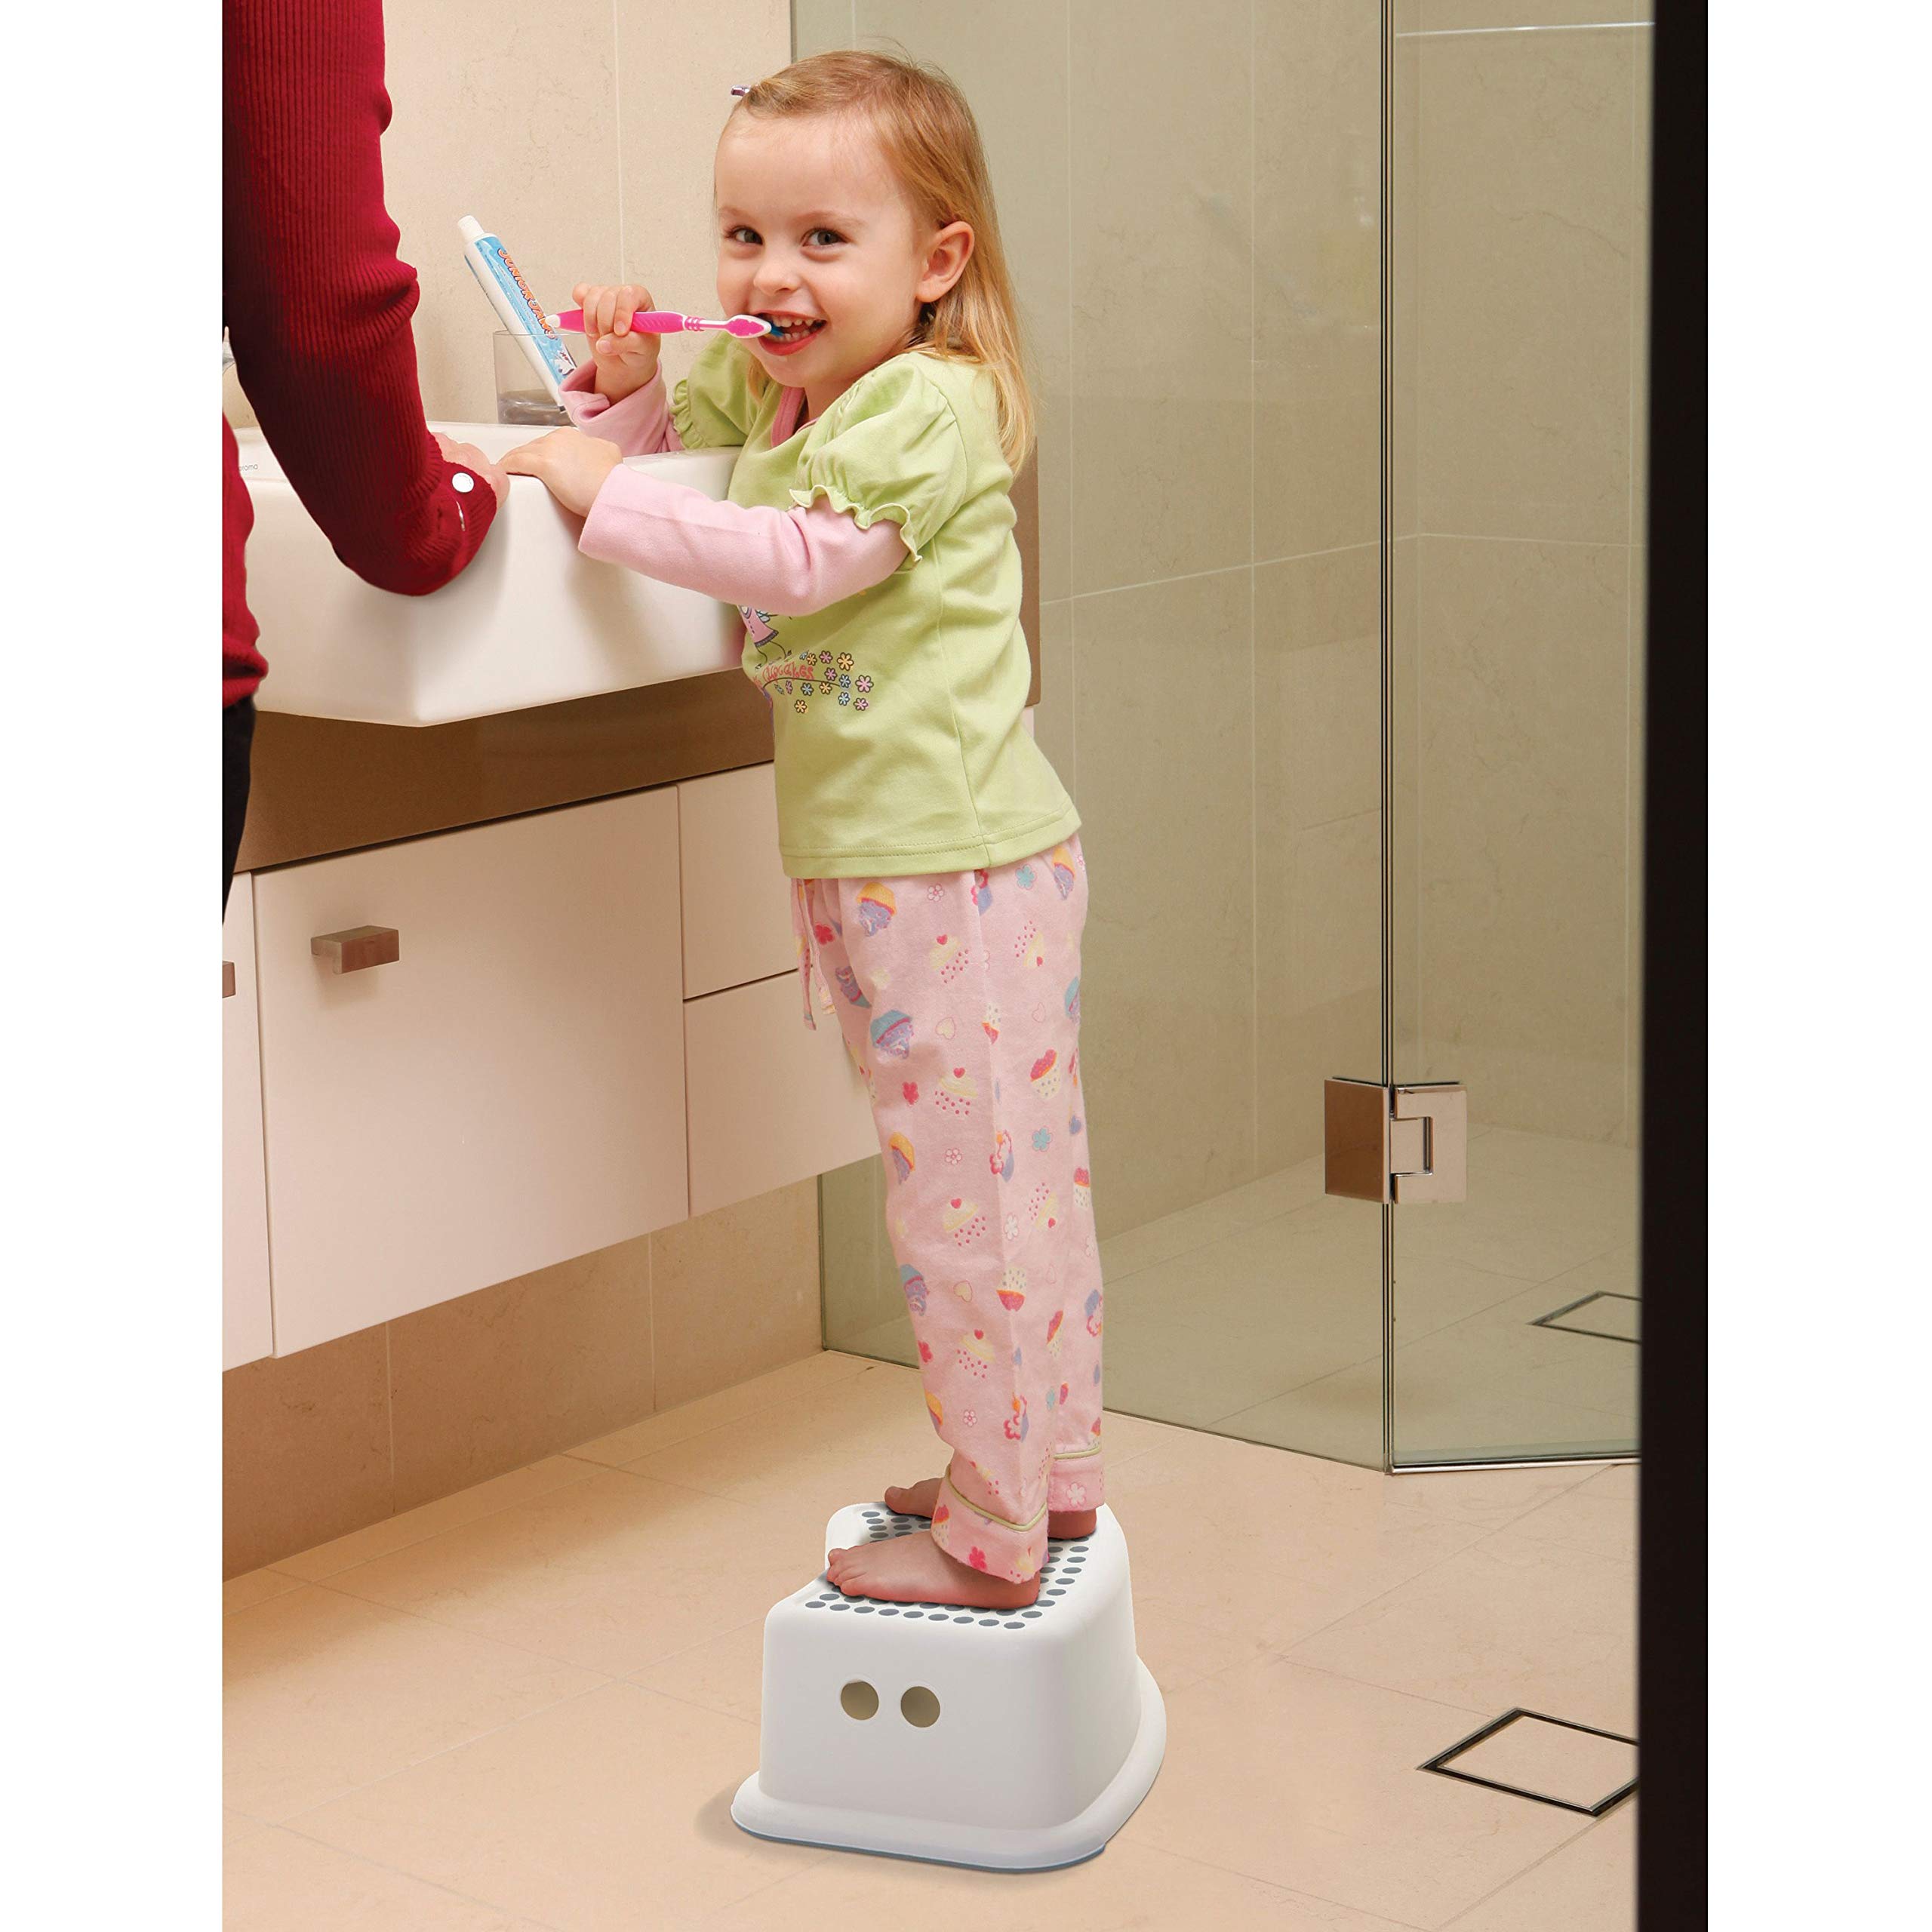 Dreambaby Step Stool for Kids - Non-Slip Base and Contoured Design for Toilet Potty Training and Sink Use